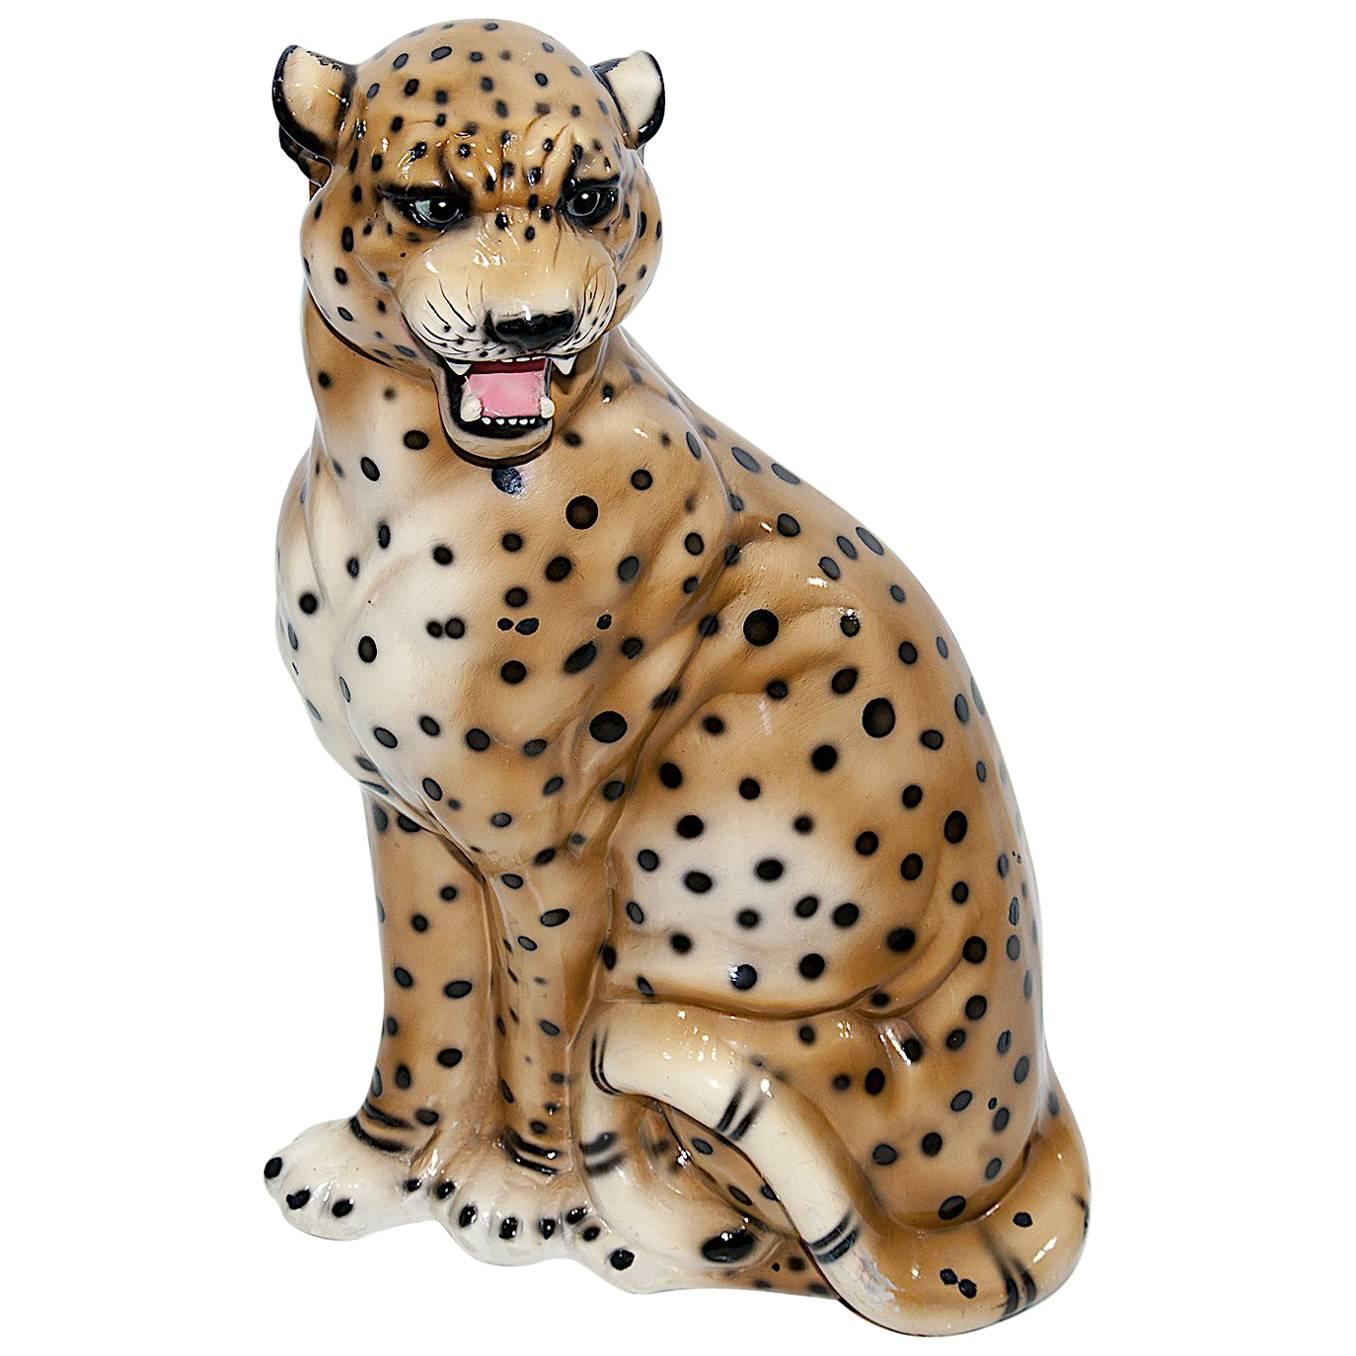 Large Leopard Italian Ceramic Sculpture from the 1950s with Hand-Painted Details